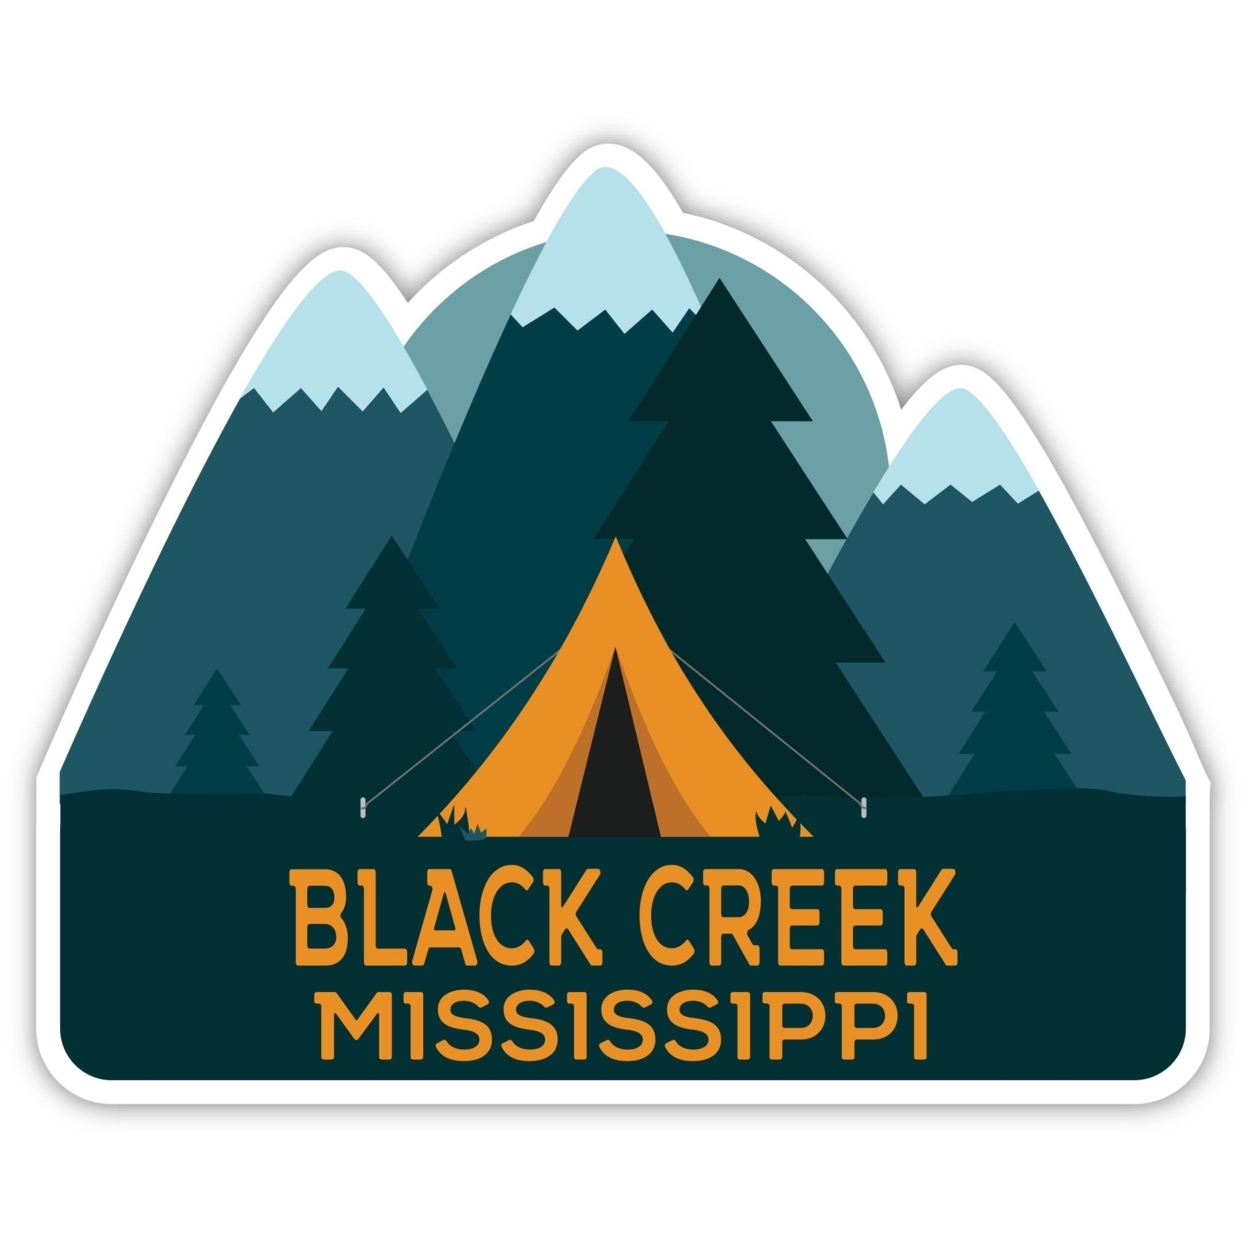 Black Creek Mississippi Souvenir Decorative Stickers (Choose Theme And Size) - 4-Pack, 12-Inch, Tent